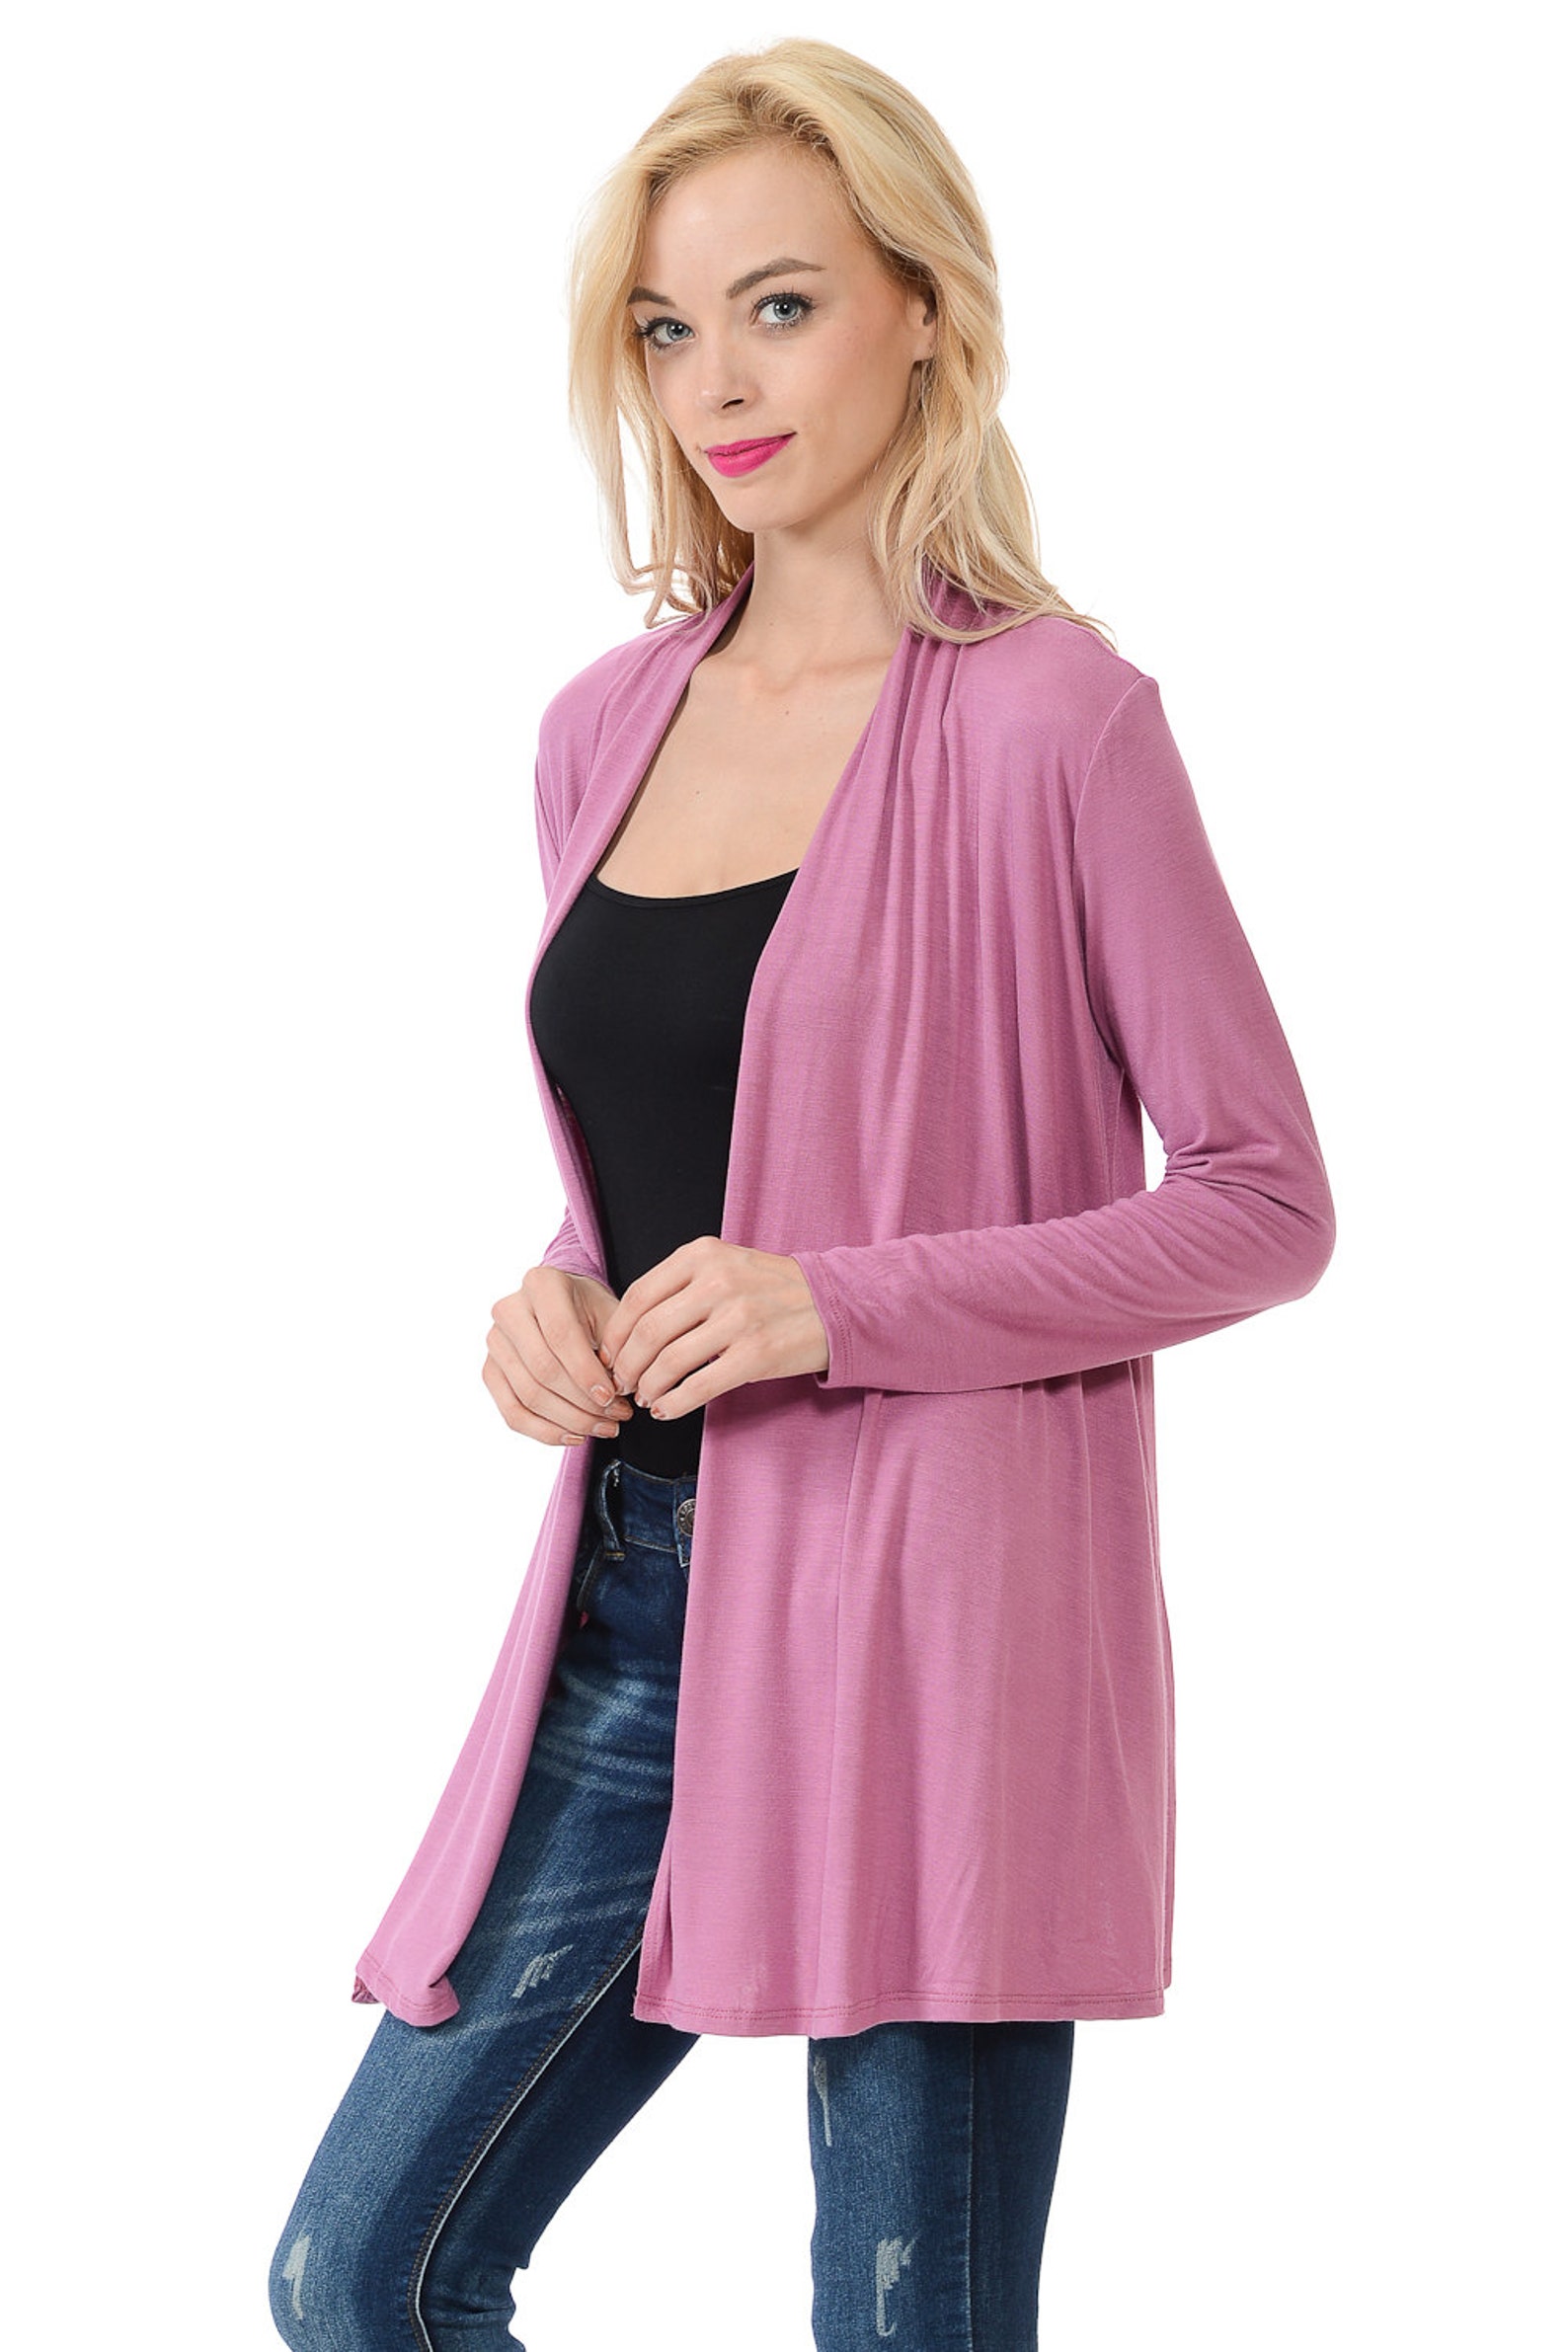 Solid Rayon Spandex Long Sleeve Jersey Cardigan Sweater Mauve - Etsy